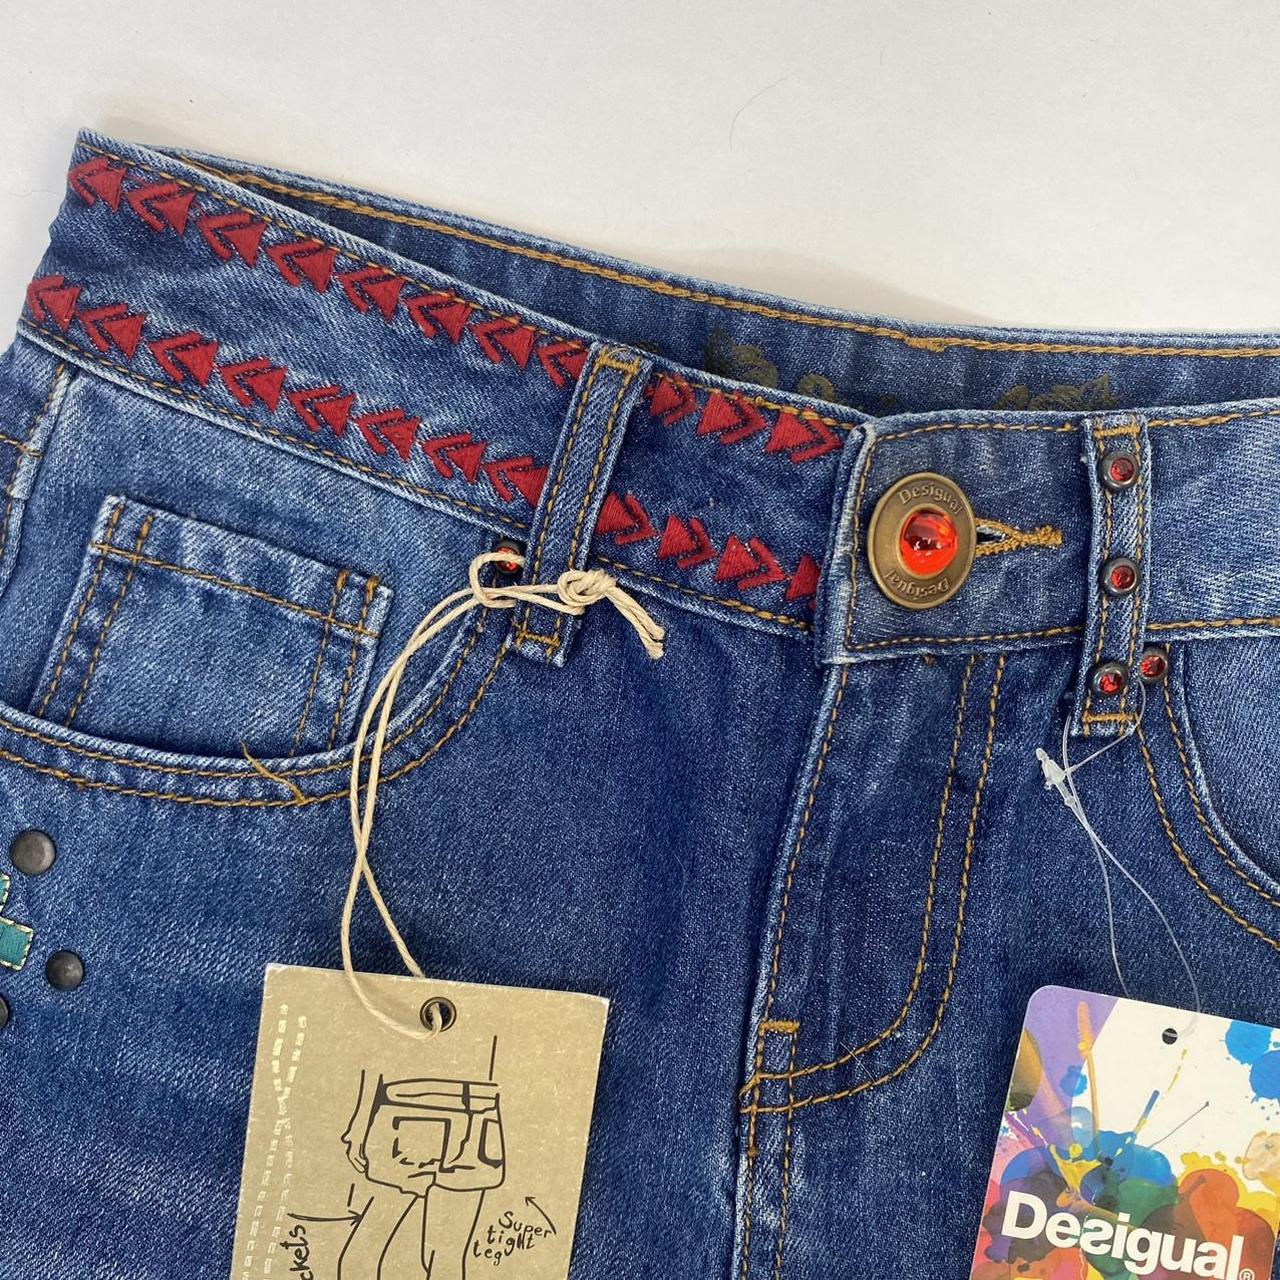 Desigual Women's Red and Blue Shorts (3)